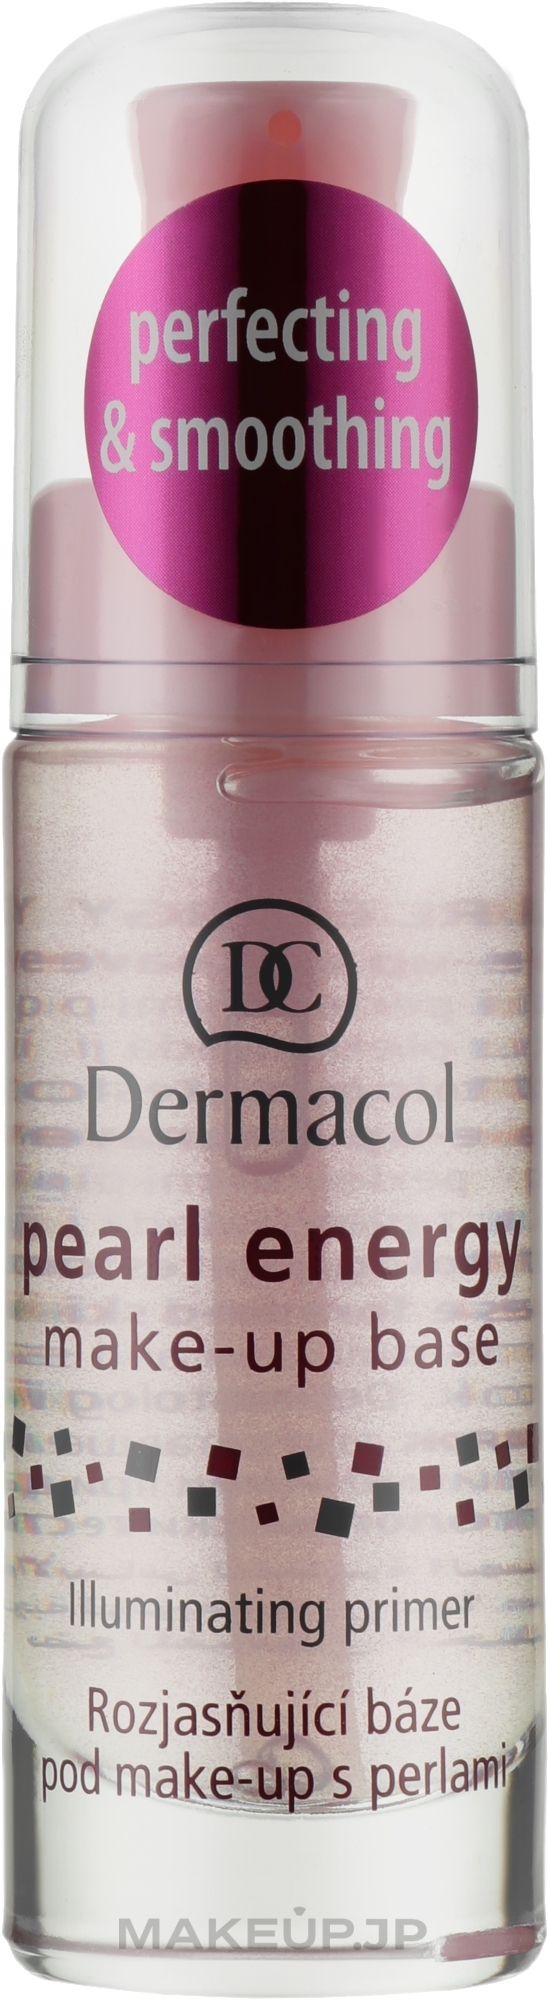 Pearl Extract Makeup Base - Dermacol Pearl Energy Make-Up Base — photo 20 ml